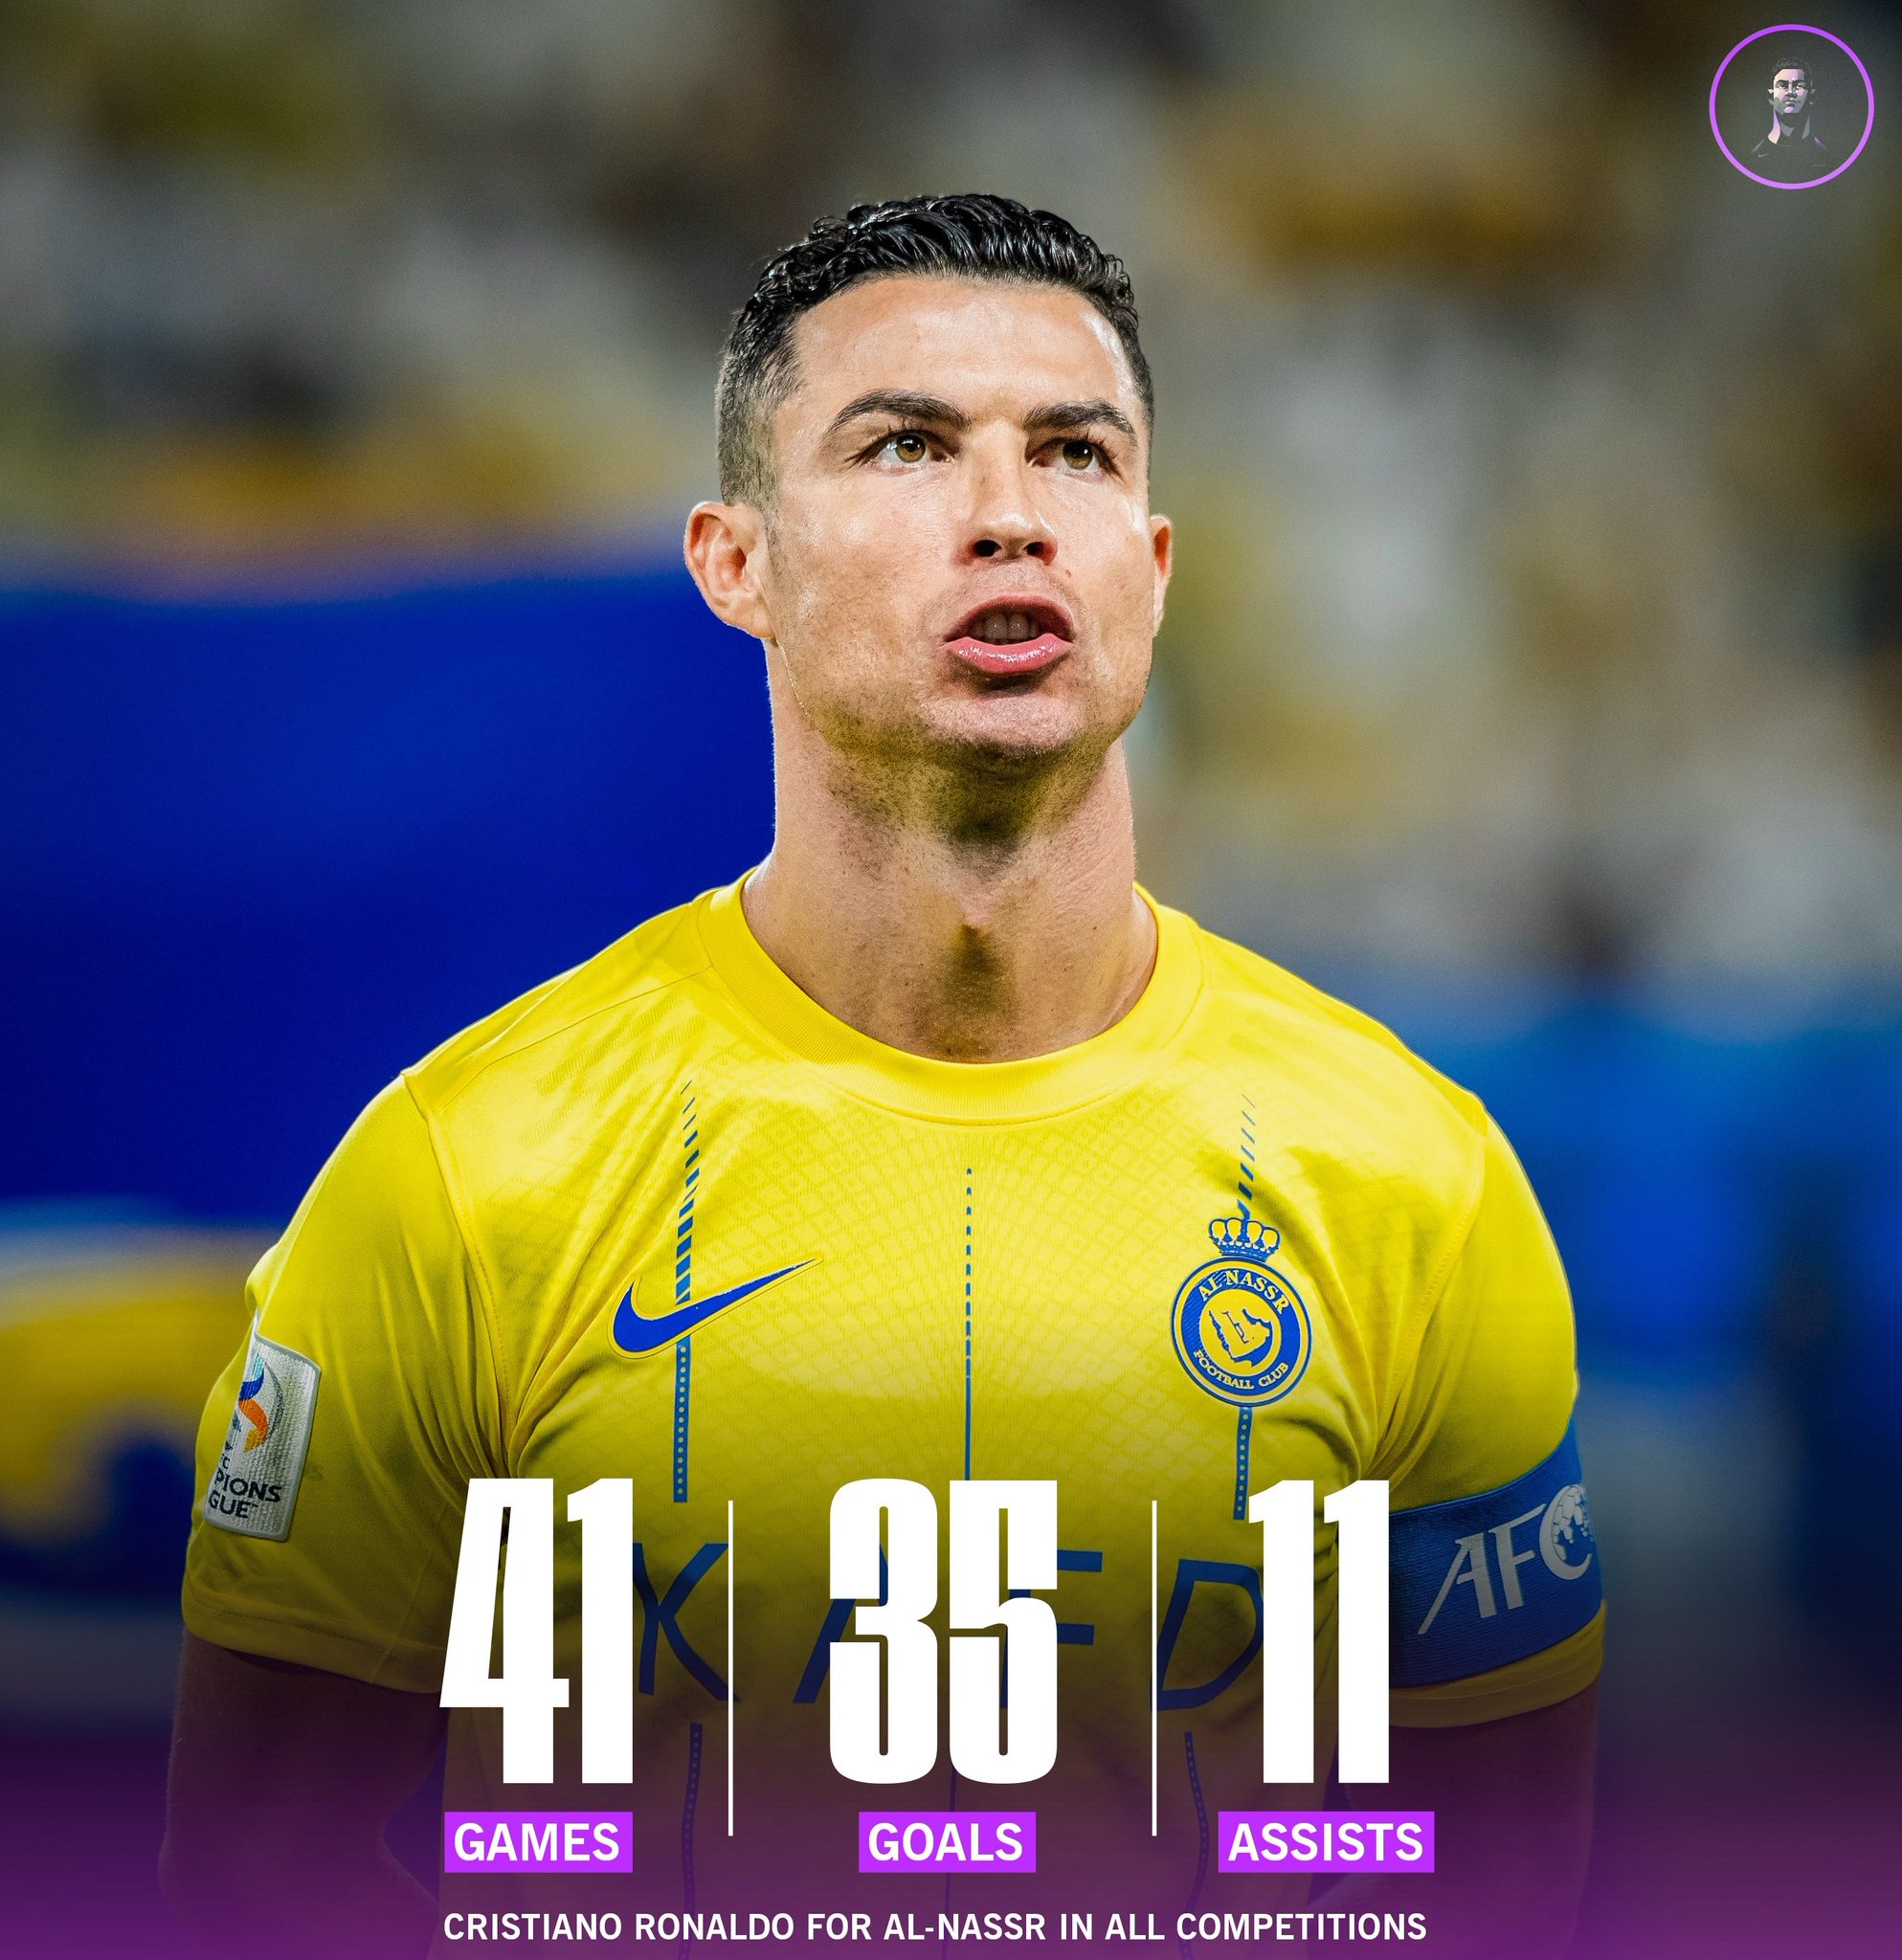 ACL on X: ✨ 𝗤𝗨𝗔𝗟𝗜𝗙𝗜𝗘𝗗 ✨ ©️ Captain Ronaldo leads 🇸🇦 Al Nassr  into the #ACL Group Stage!  / X